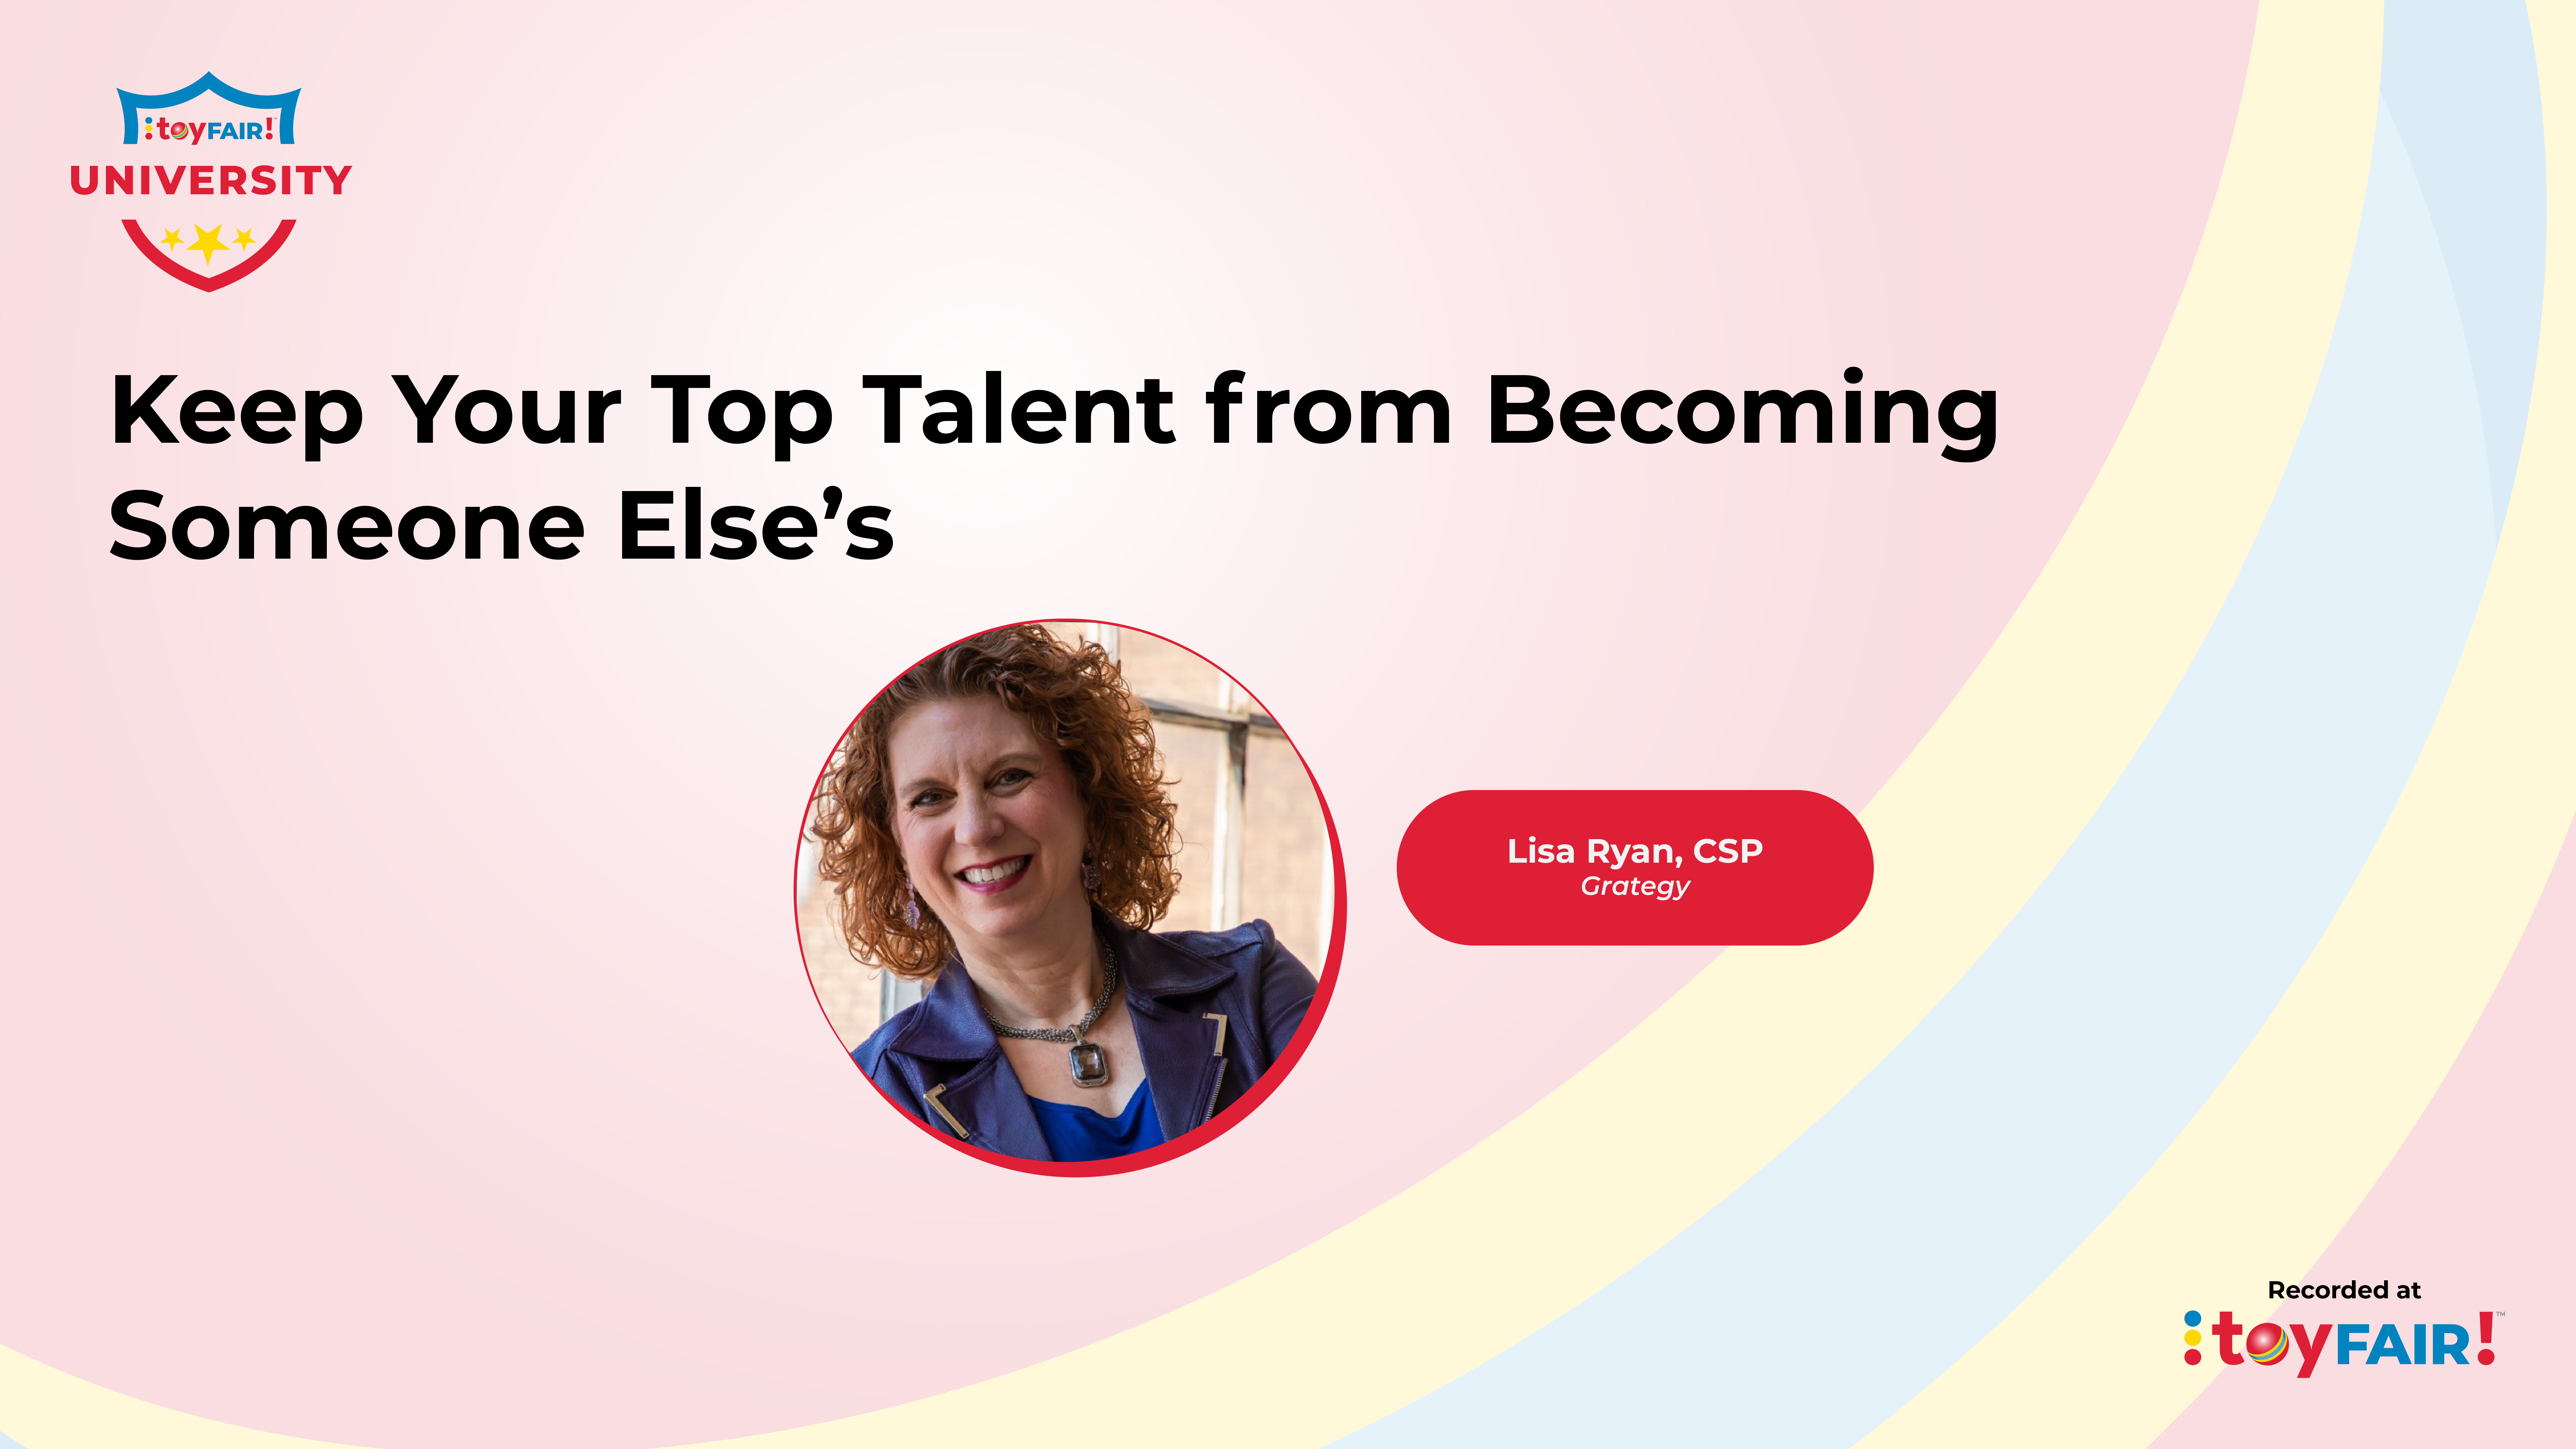 Keep Your Top Talent from Becoming Someone Else’s